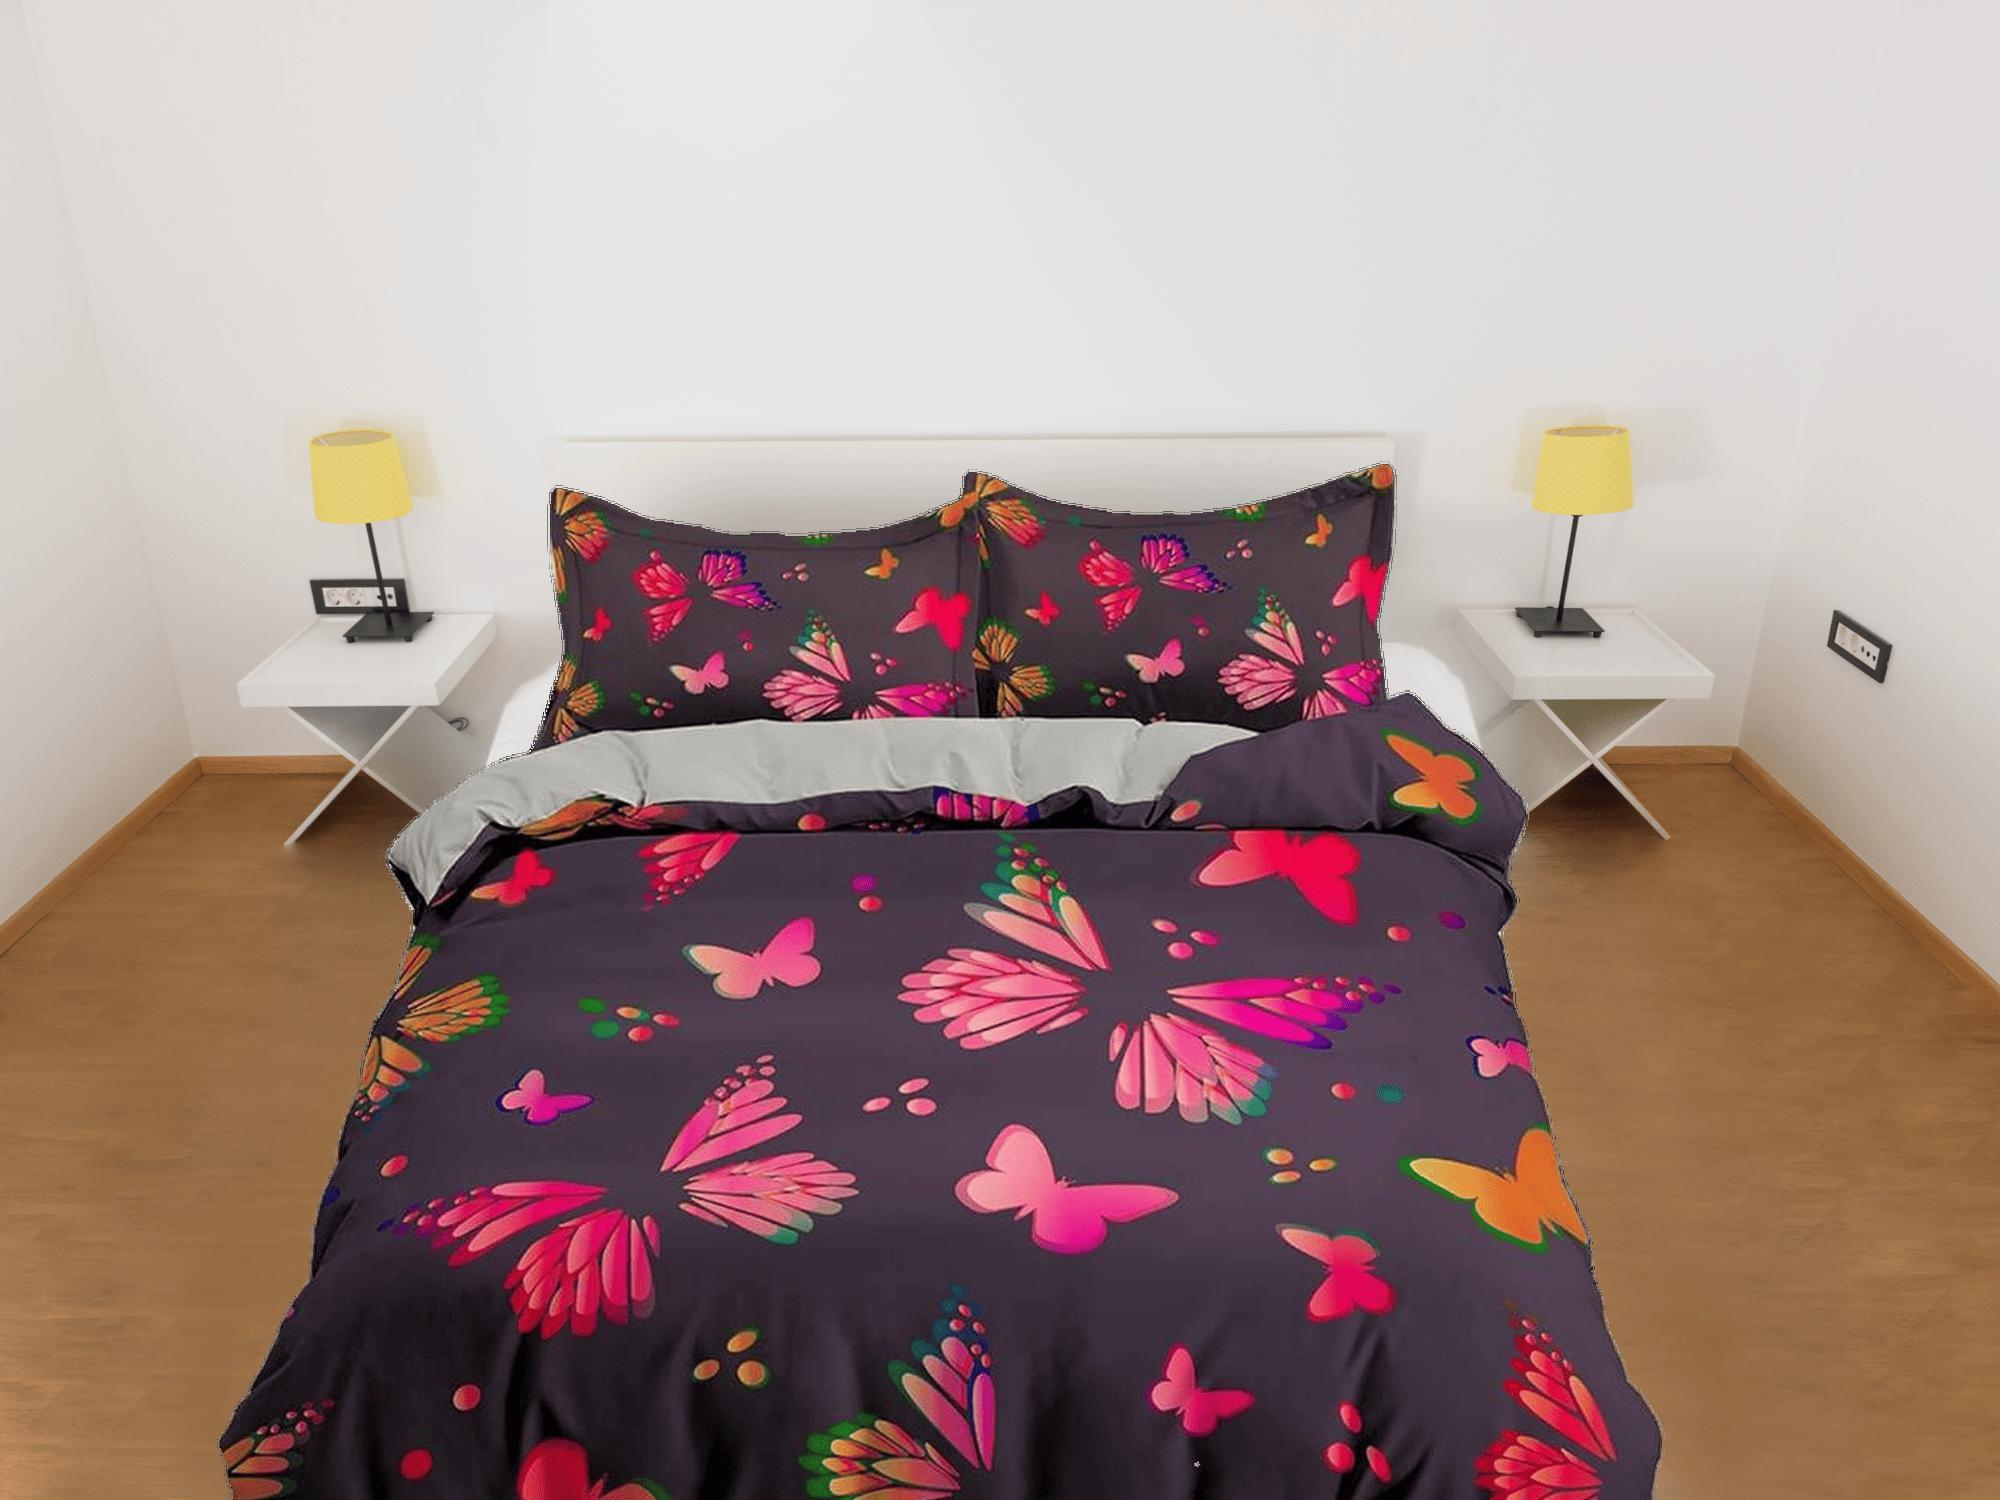 daintyduvet Pink butterfly bedding duvet cover colorful dorm bedding, full size adult duvet king queen twin, butterfly nursery toddler bedding